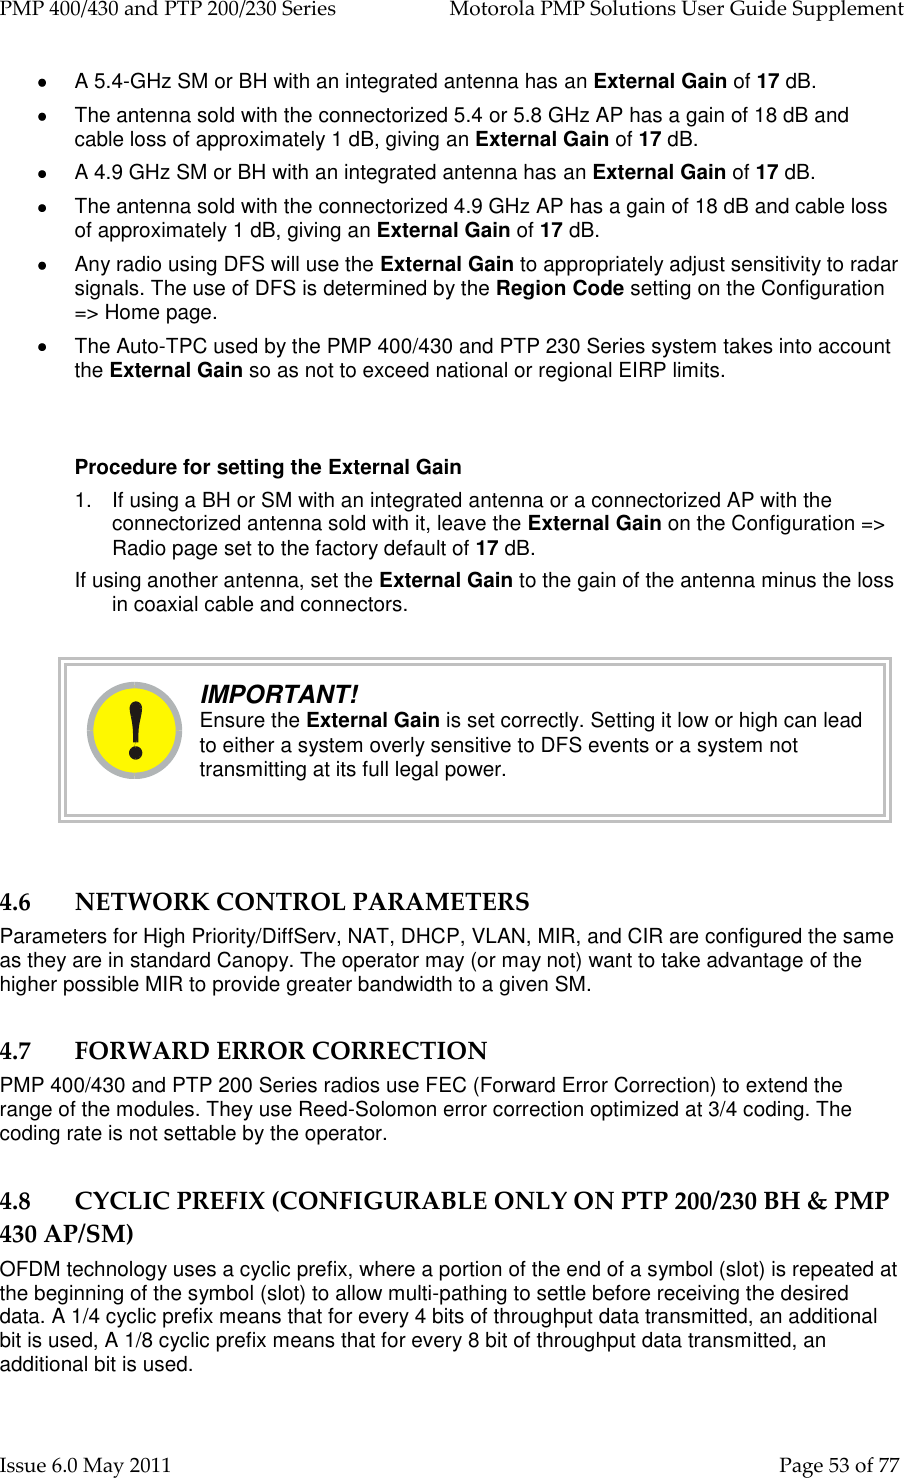 PMP 400/430 and PTP 200/230 Series   Motorola PMP Solutions User Guide Supplement Issue 6.0 May 2011    Page 53 of 77   A 5.4-GHz SM or BH with an integrated antenna has an External Gain of 17 dB.   The antenna sold with the connectorized 5.4 or 5.8 GHz AP has a gain of 18 dB and cable loss of approximately 1 dB, giving an External Gain of 17 dB.   A 4.9 GHz SM or BH with an integrated antenna has an External Gain of 17 dB.   The antenna sold with the connectorized 4.9 GHz AP has a gain of 18 dB and cable loss of approximately 1 dB, giving an External Gain of 17 dB.   Any radio using DFS will use the External Gain to appropriately adjust sensitivity to radar signals. The use of DFS is determined by the Region Code setting on the Configuration =&gt; Home page.   The Auto-TPC used by the PMP 400/430 and PTP 230 Series system takes into account the External Gain so as not to exceed national or regional EIRP limits.  Procedure for setting the External Gain 1.  If using a BH or SM with an integrated antenna or a connectorized AP with the connectorized antenna sold with it, leave the External Gain on the Configuration =&gt; Radio page set to the factory default of 17 dB. If using another antenna, set the External Gain to the gain of the antenna minus the loss in coaxial cable and connectors.     IMPORTANT! Ensure the External Gain is set correctly. Setting it low or high can lead to either a system overly sensitive to DFS events or a system not transmitting at its full legal power.  4.6 NETWORK CONTROL PARAMETERS Parameters for High Priority/DiffServ, NAT, DHCP, VLAN, MIR, and CIR are configured the same as they are in standard Canopy. The operator may (or may not) want to take advantage of the higher possible MIR to provide greater bandwidth to a given SM. 4.7 FORWARD ERROR CORRECTION PMP 400/430 and PTP 200 Series radios use FEC (Forward Error Correction) to extend the range of the modules. They use Reed-Solomon error correction optimized at 3/4 coding. The coding rate is not settable by the operator. 4.8 CYCLIC PREFIX (CONFIGURABLE ONLY ON PTP 200/230 BH &amp; PMP 430 AP/SM) OFDM technology uses a cyclic prefix, where a portion of the end of a symbol (slot) is repeated at the beginning of the symbol (slot) to allow multi-pathing to settle before receiving the desired data. A 1/4 cyclic prefix means that for every 4 bits of throughput data transmitted, an additional bit is used, A 1/8 cyclic prefix means that for every 8 bit of throughput data transmitted, an additional bit is used. 